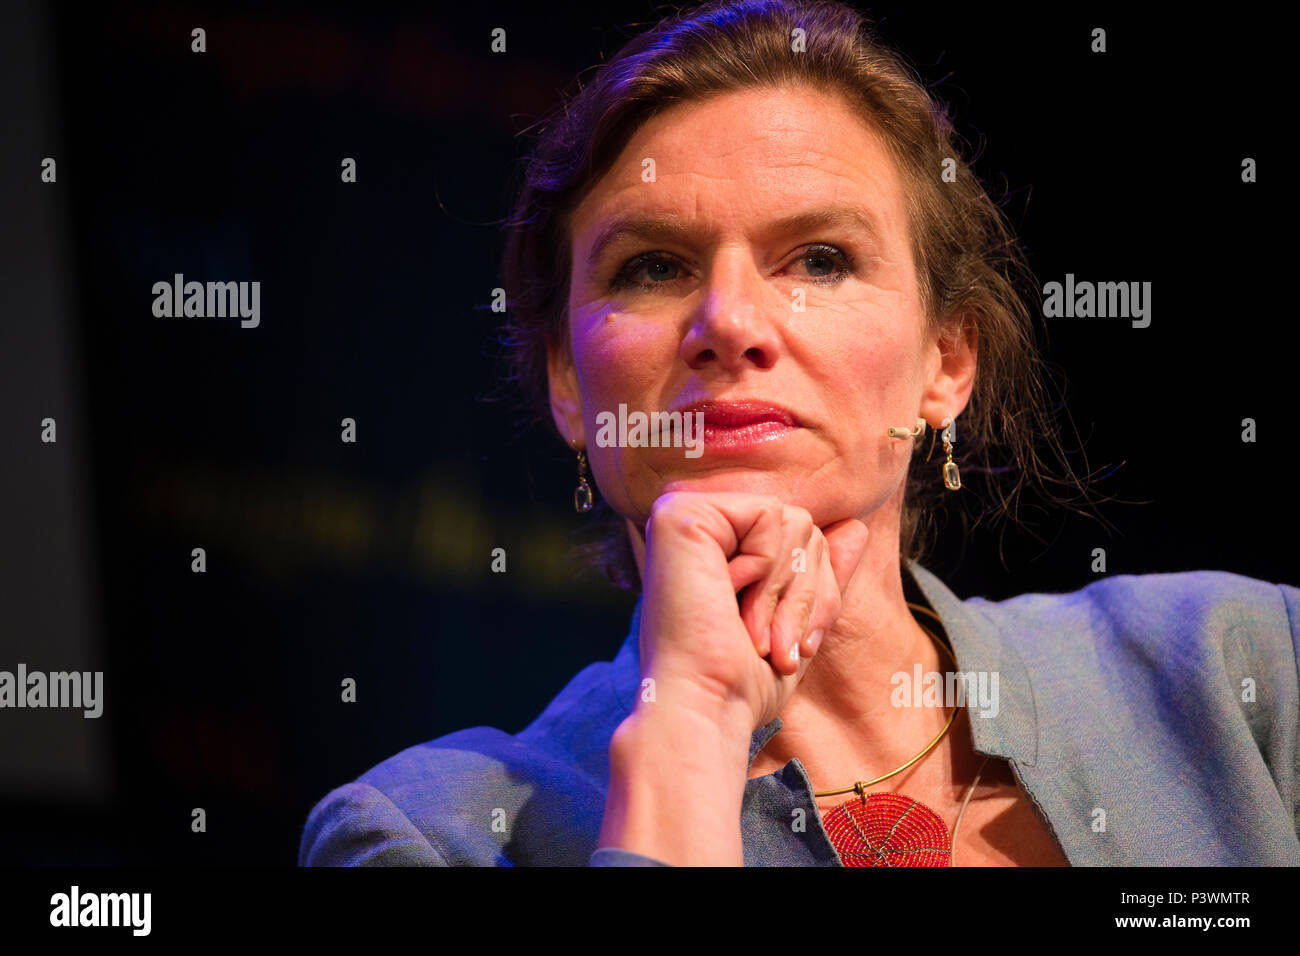 Mariana Mazzucato,   author of 'The Value of Everything', economist, professor in the Economics of Innovation and Public Value and Director of the Institute for Innovation and Public Purpose at University College London (UCL) and the RM Phillips Chair in the Economics of Innovation at the University of Sussex.  Pictured at the 2018 Hay Festival of Literature and the Arts.  The annual festival  in the small town of Hay on Wye on the Welsh borders , attracts  writers and thinkers from across the globe for 10 days of celebrations of the best of the written word, political though  and literary deb Stock Photo